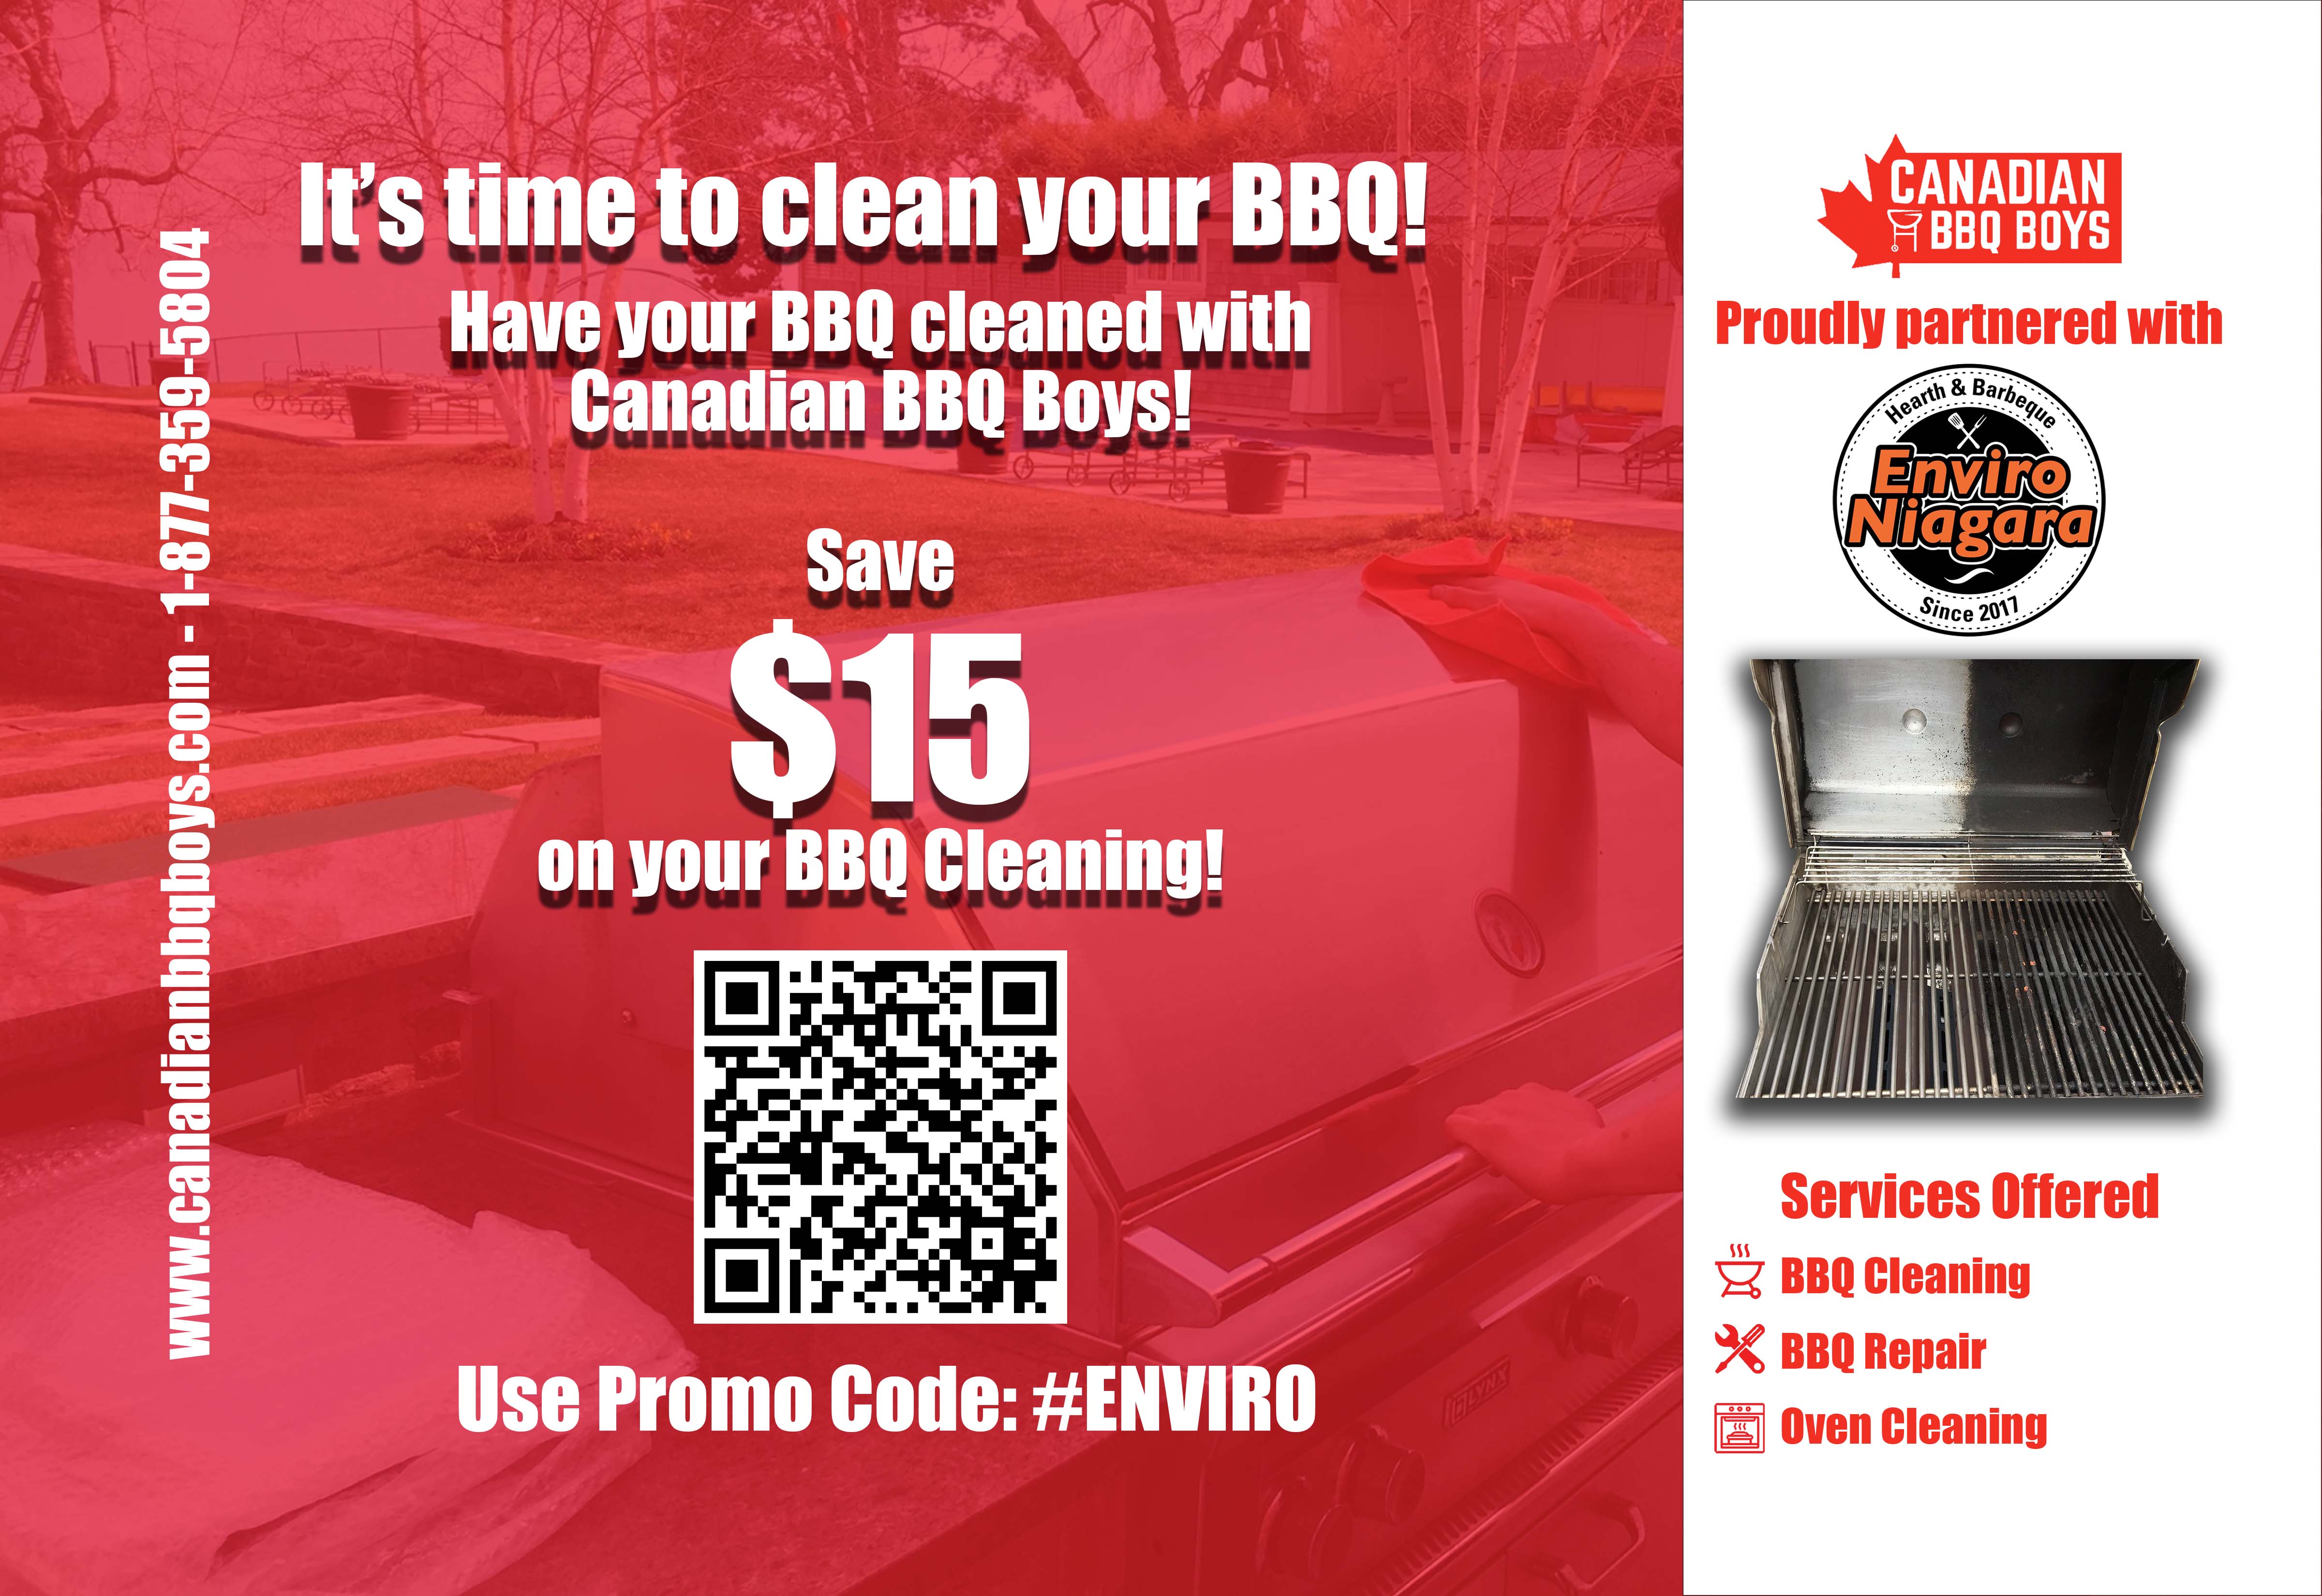 Canadian BBQ Boys: Pro Barbecue Cleaning Service